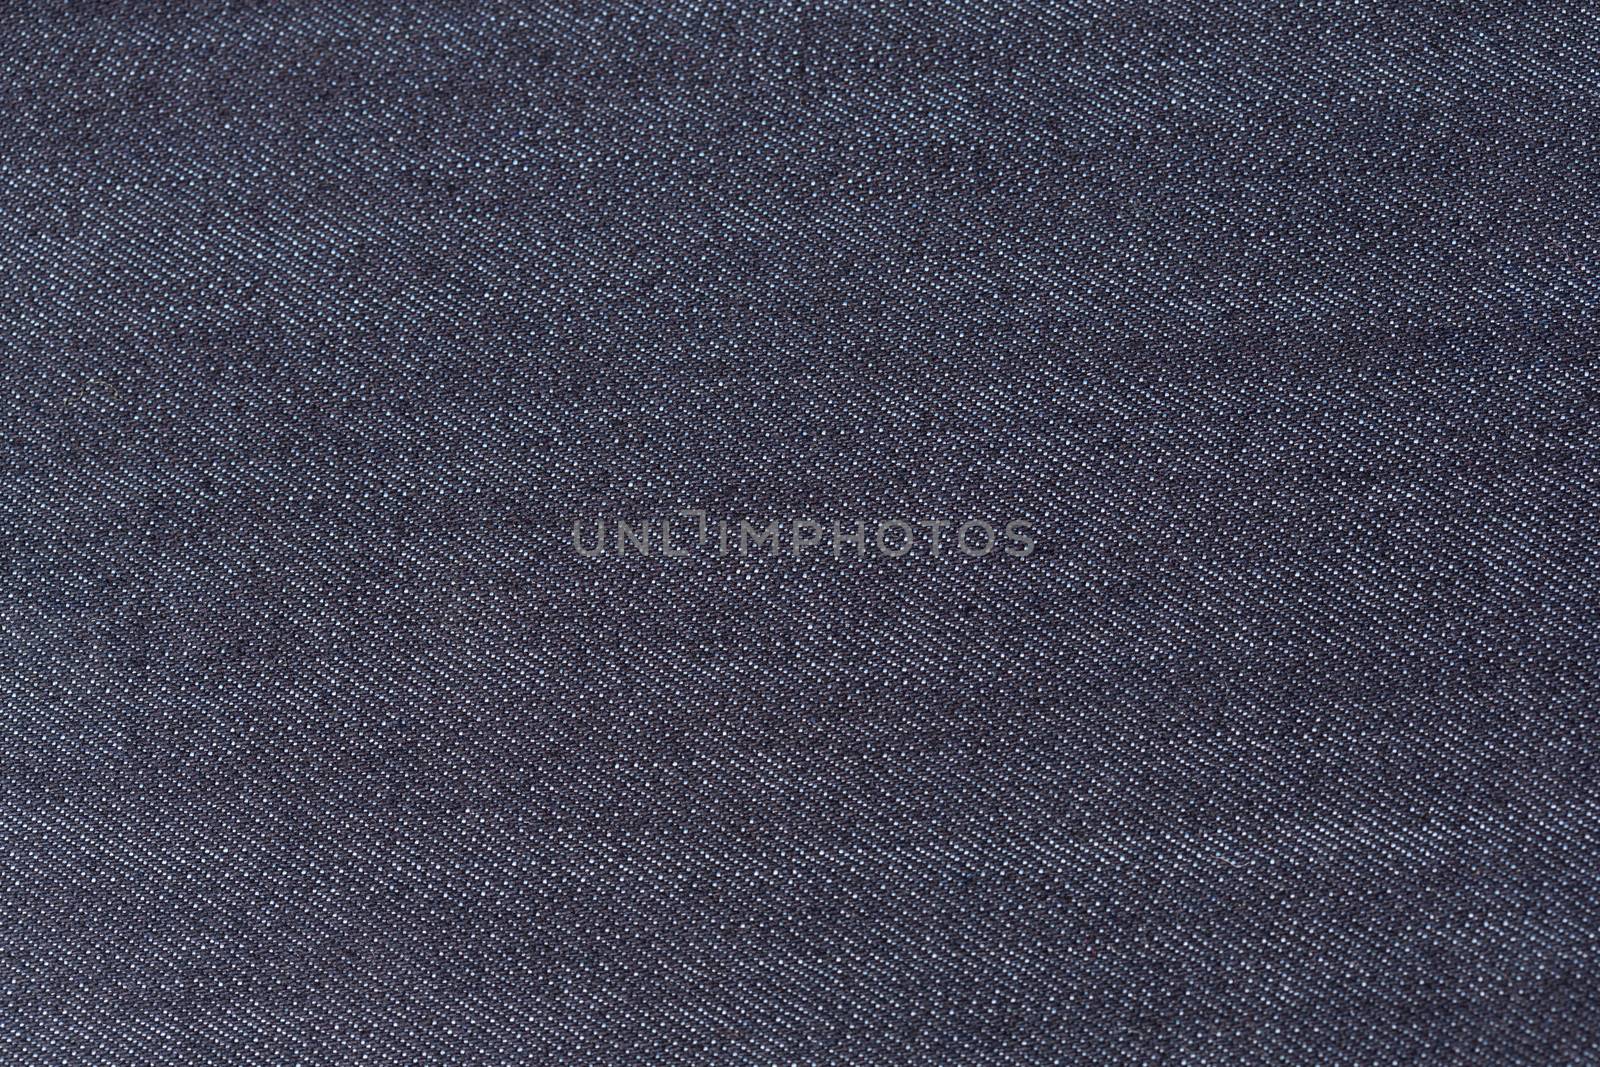 Background denim texture by stockyimages